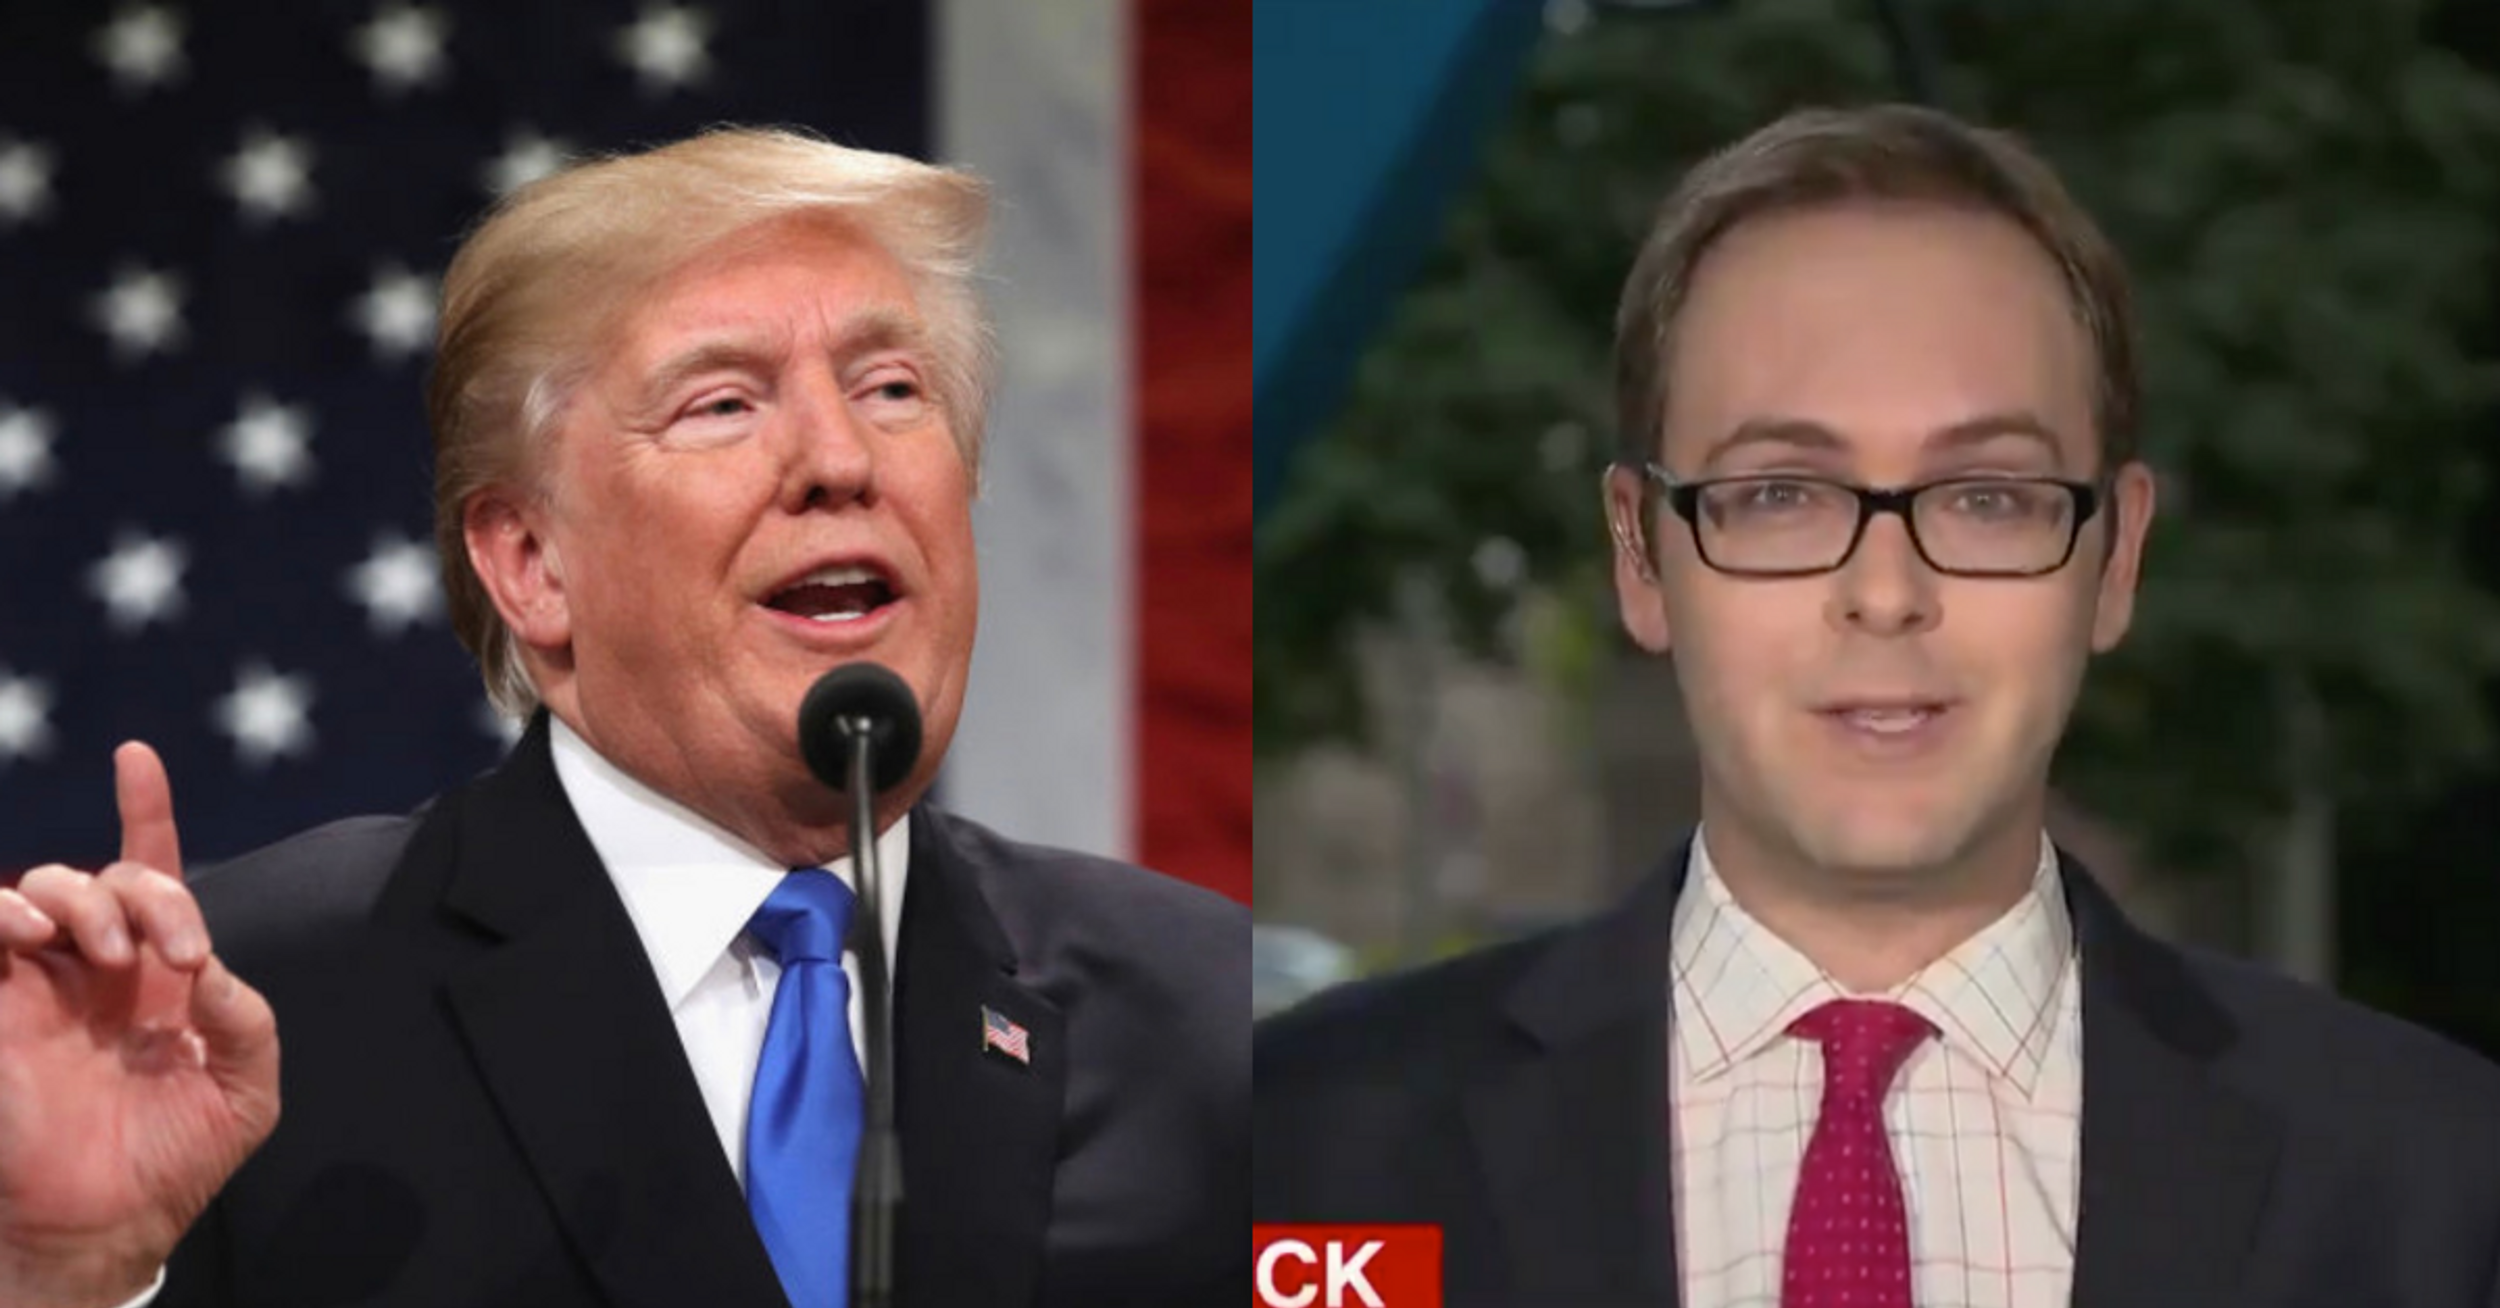 CNN Reporter Says Trump's 'Dark Shadows' Claims Are 'Almost Too Stupid To Fact-Check' In Brutal Takedown